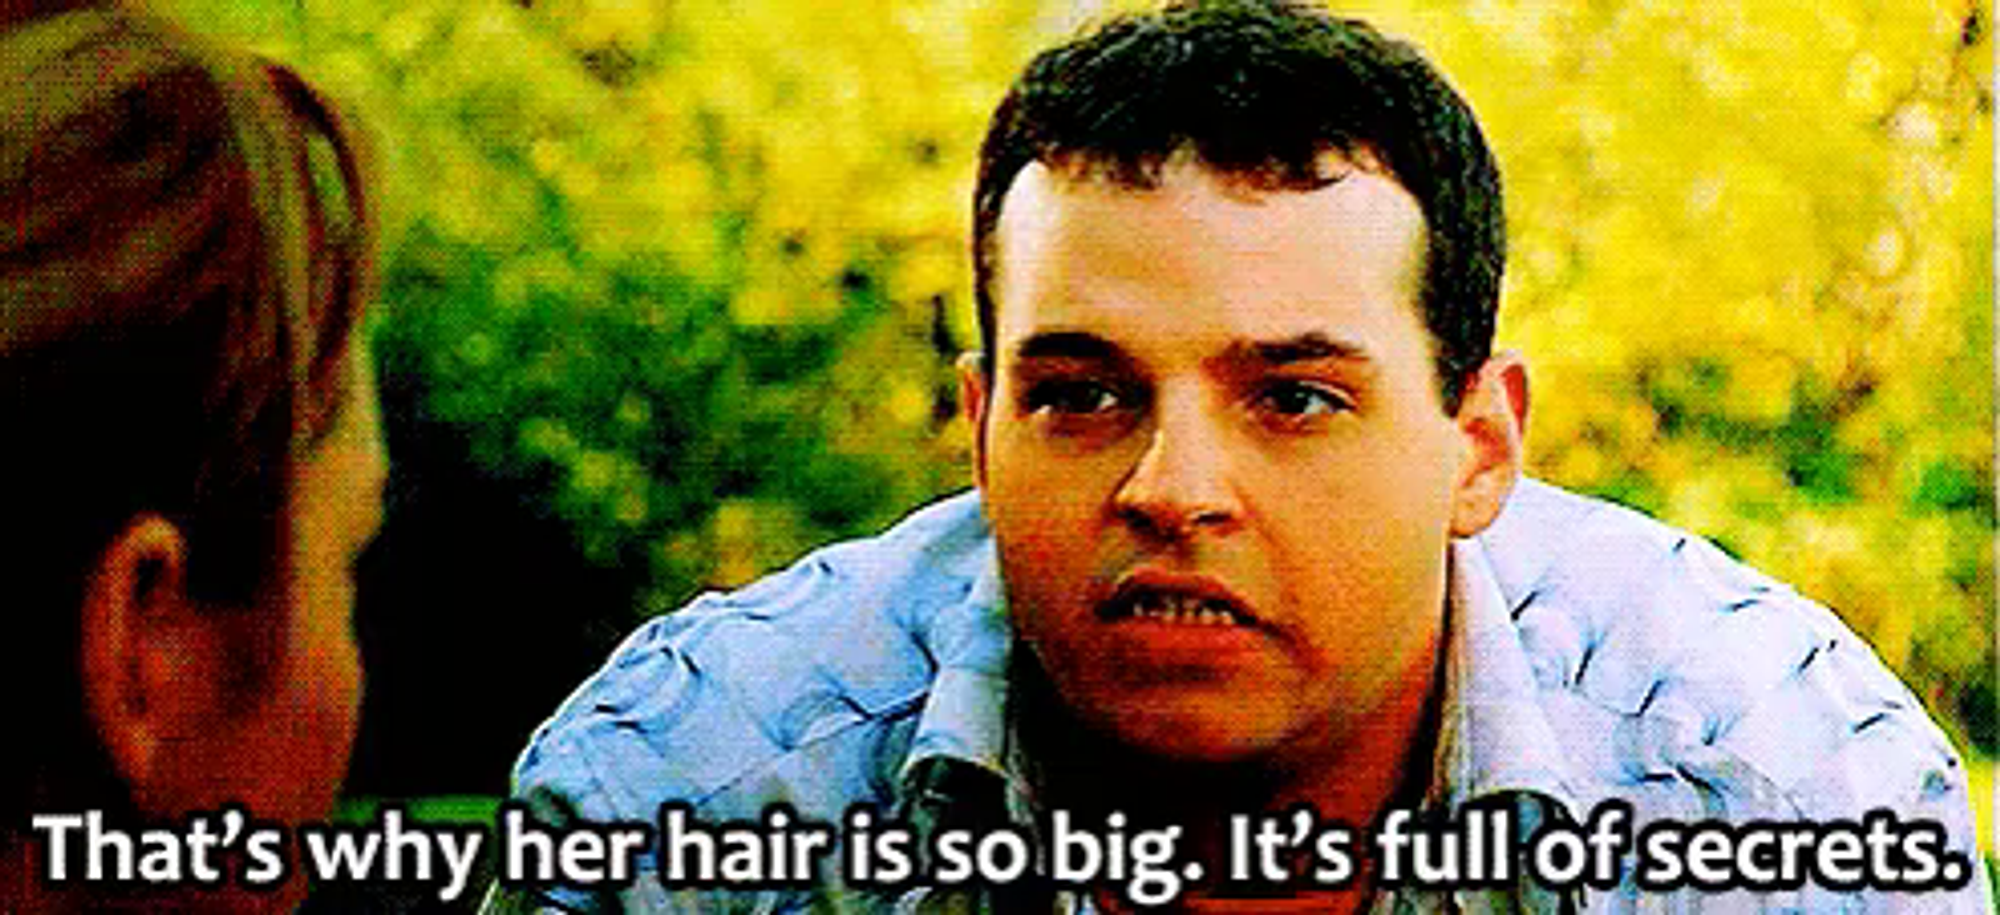 Description: A still from Mean Girls with the caption, “That’s why her hair is so big. It’s full of secrets.”